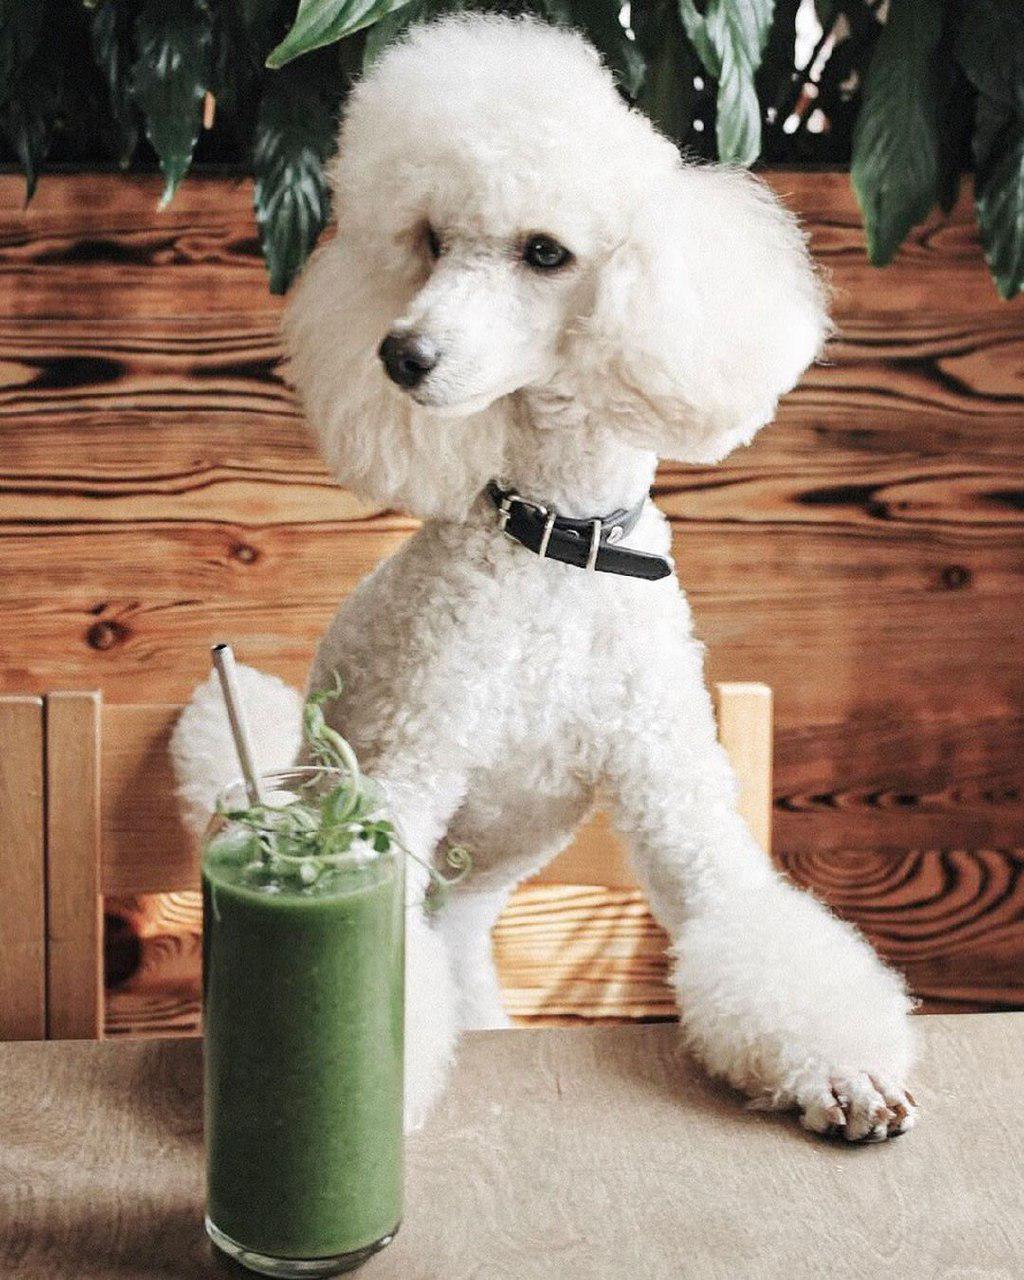 A Poodle sitting at the table behind the healthy smoothie